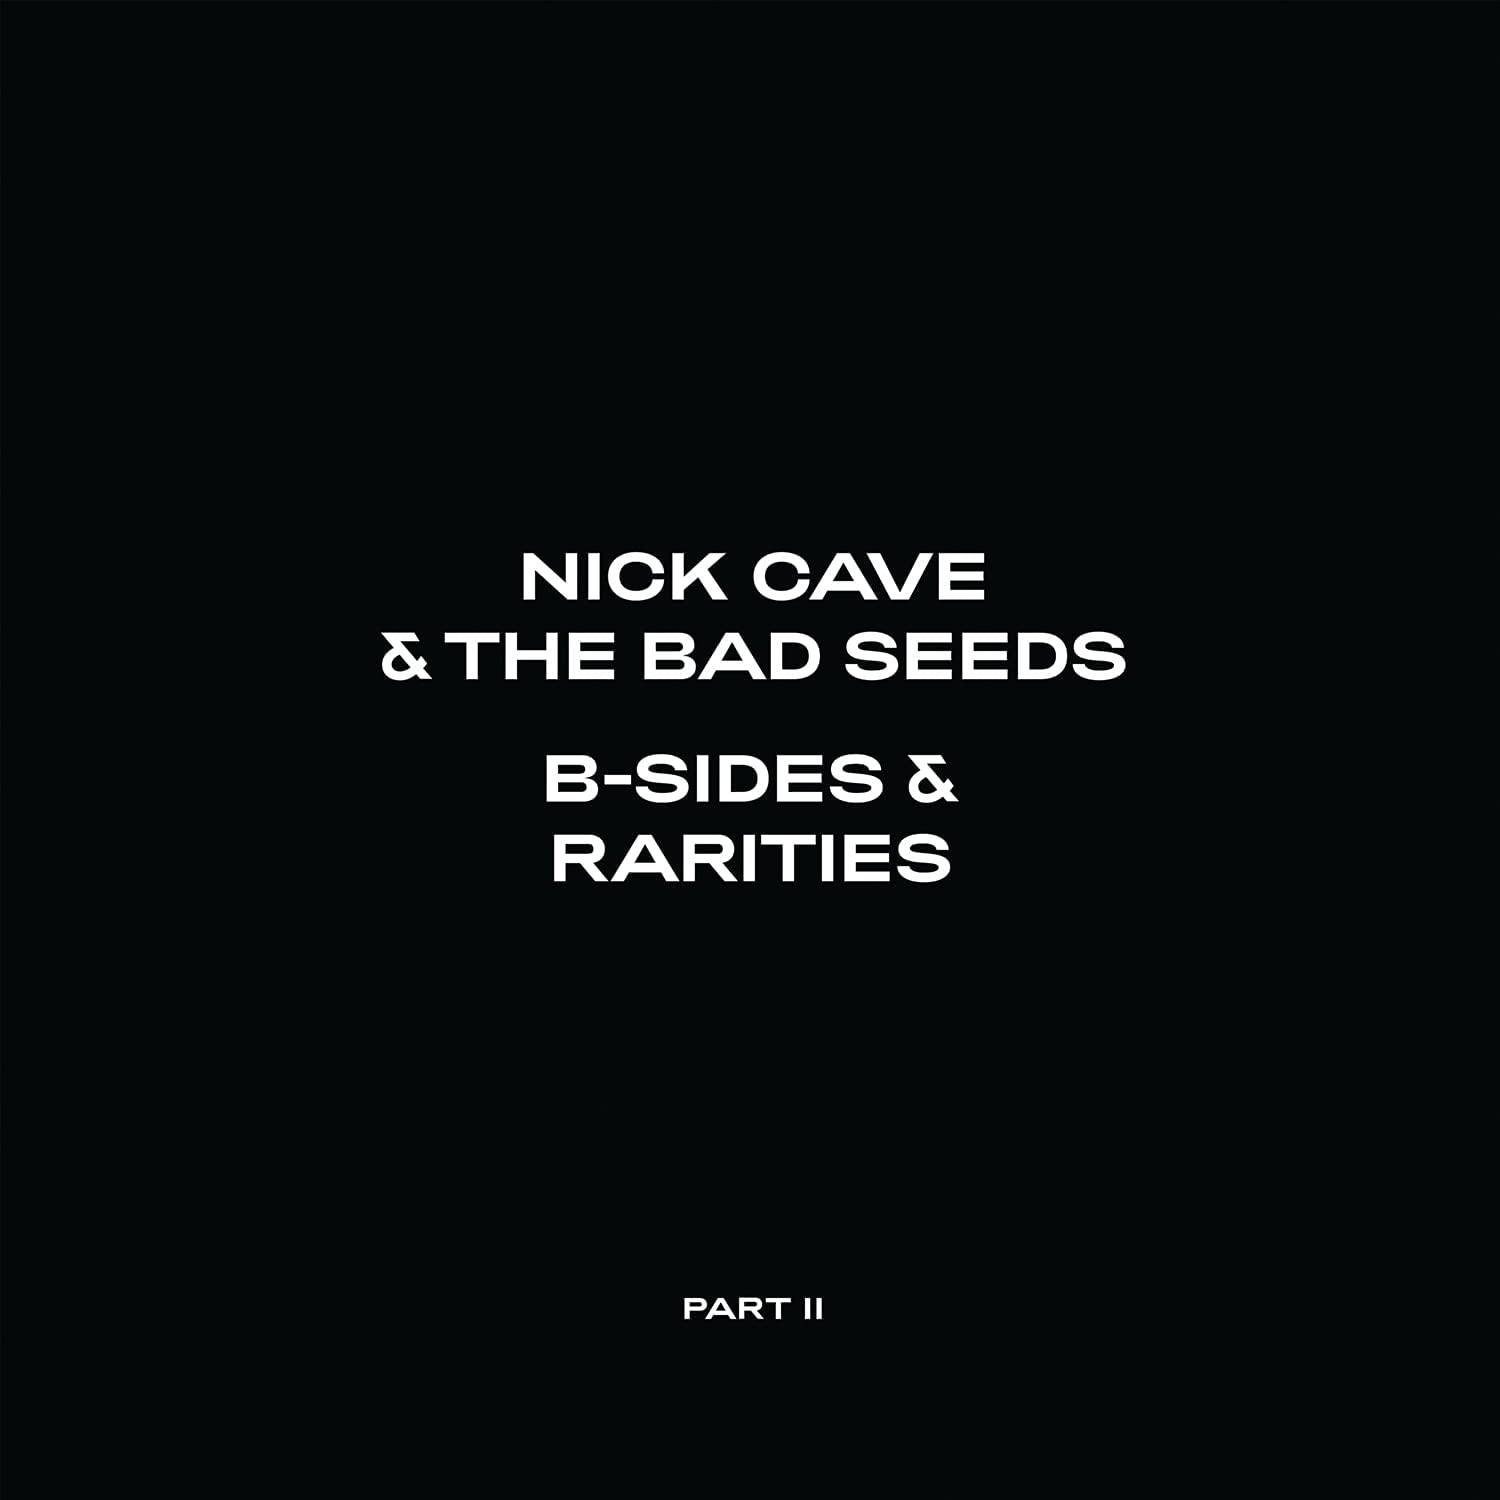 Nick-Cave--The-Bad-Seeds---B-Sides--Rarities-Part-II